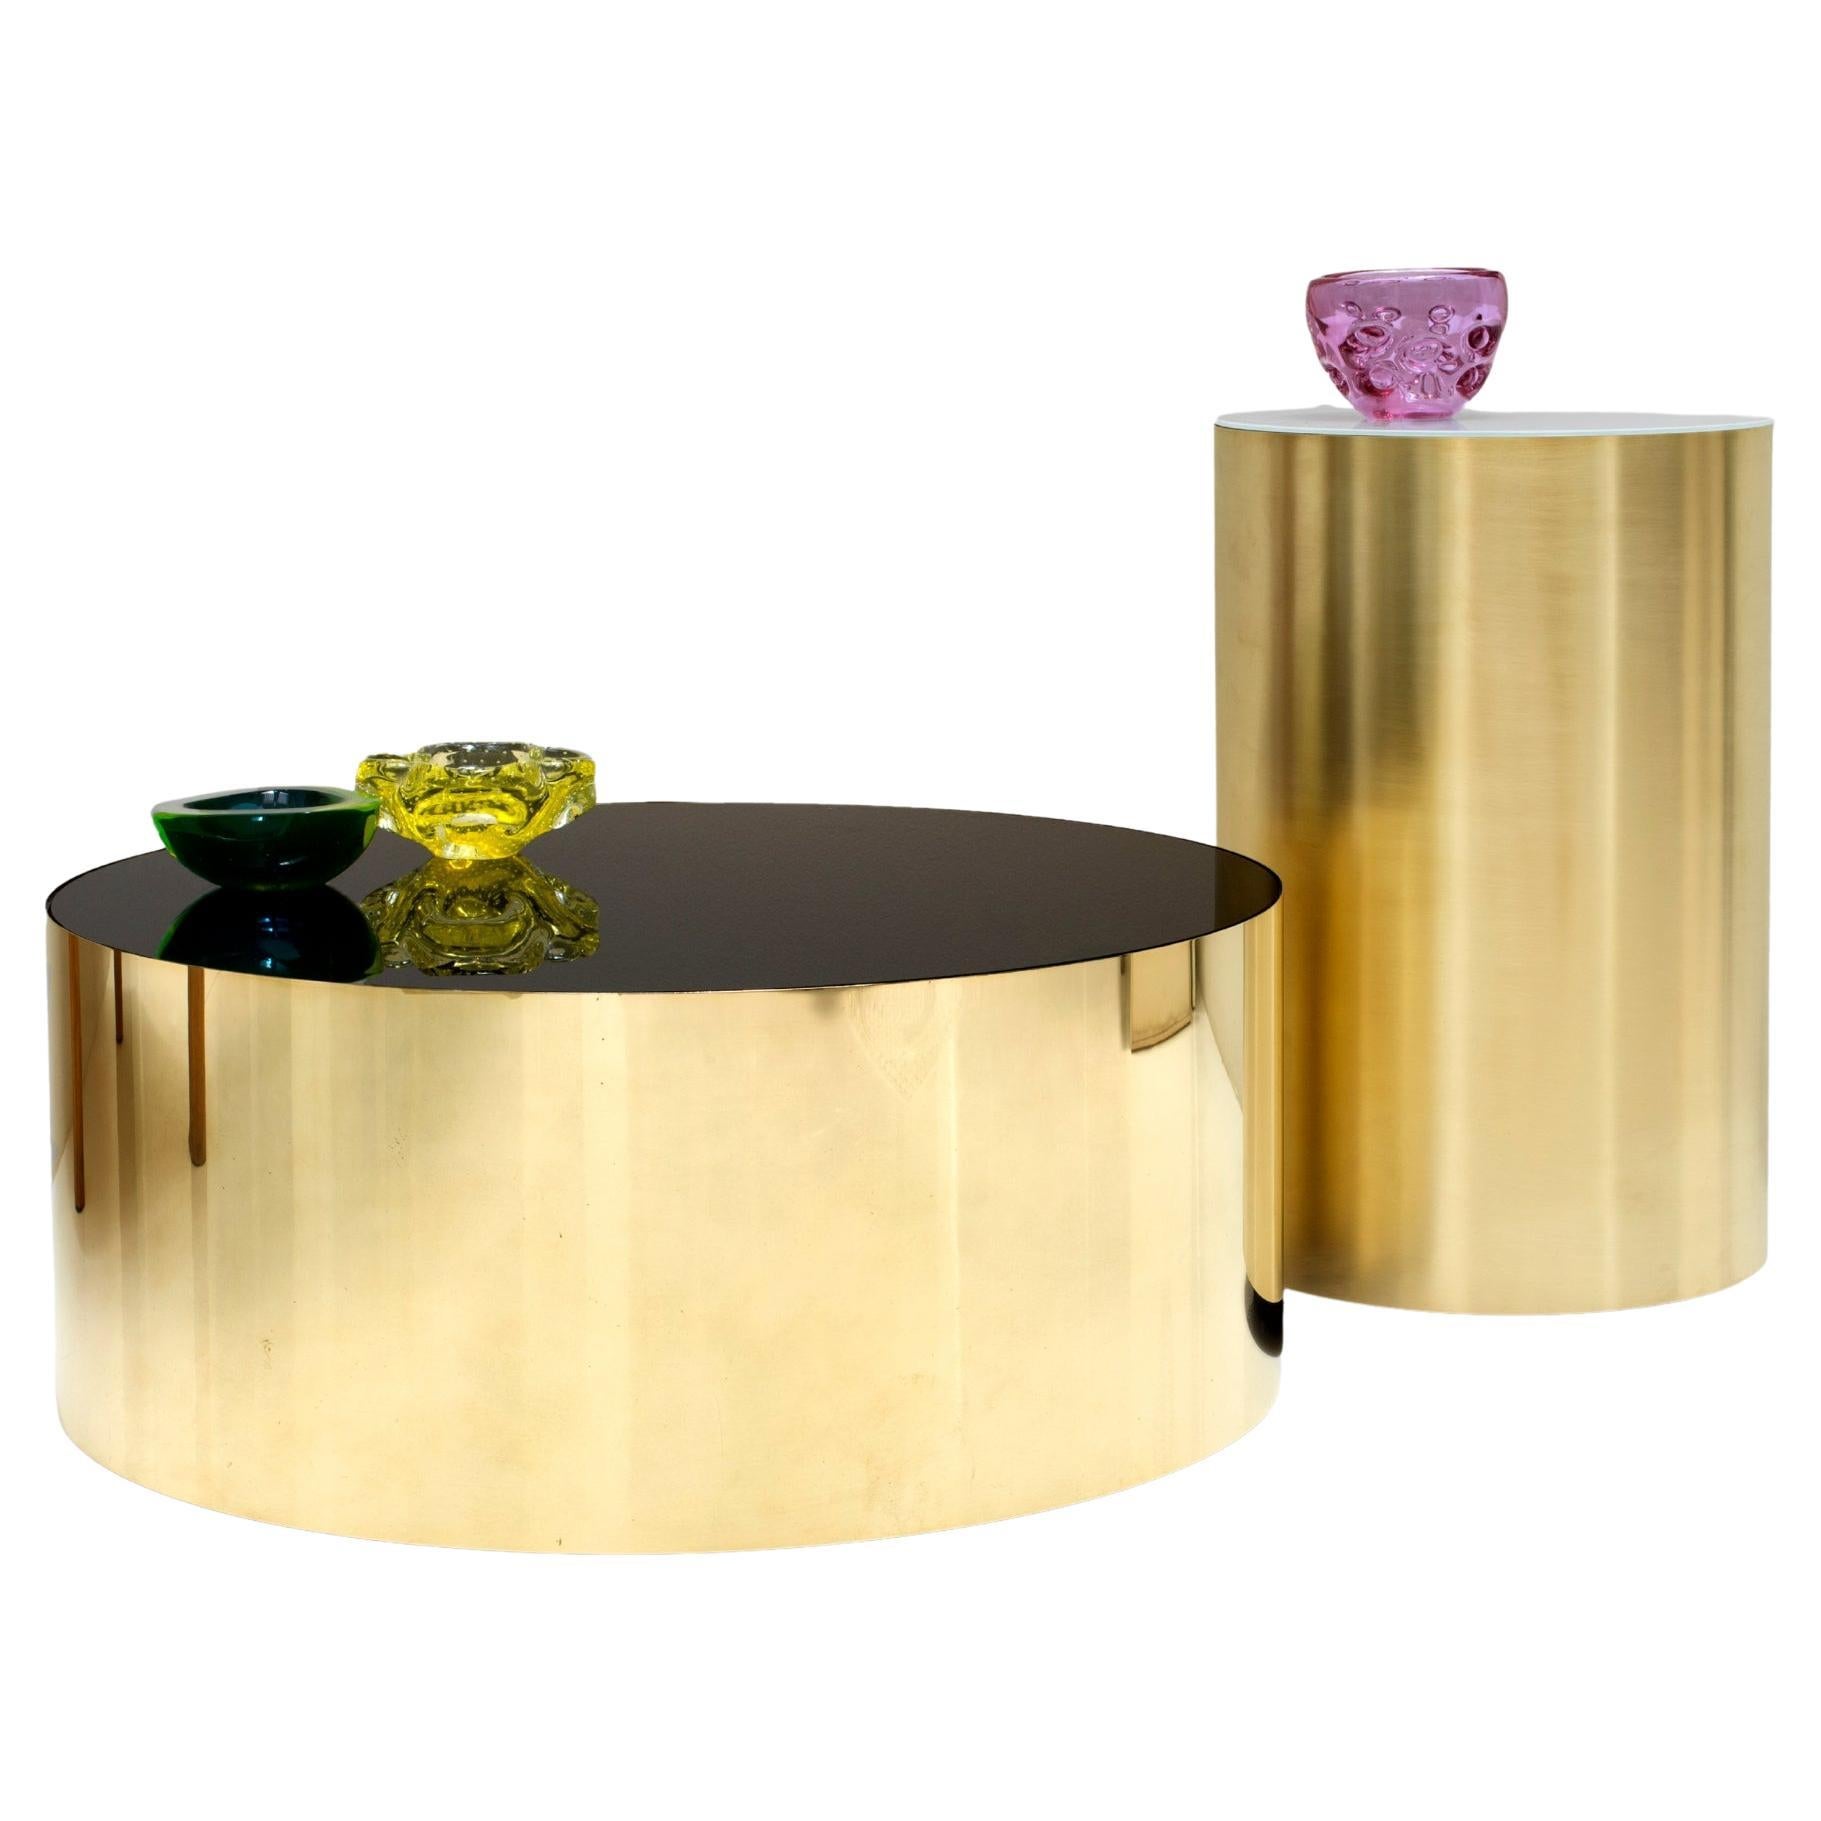 Single Side Table, Full Moon Shape, Brass/Steel & HighGloss Laminate, Size S For Sale